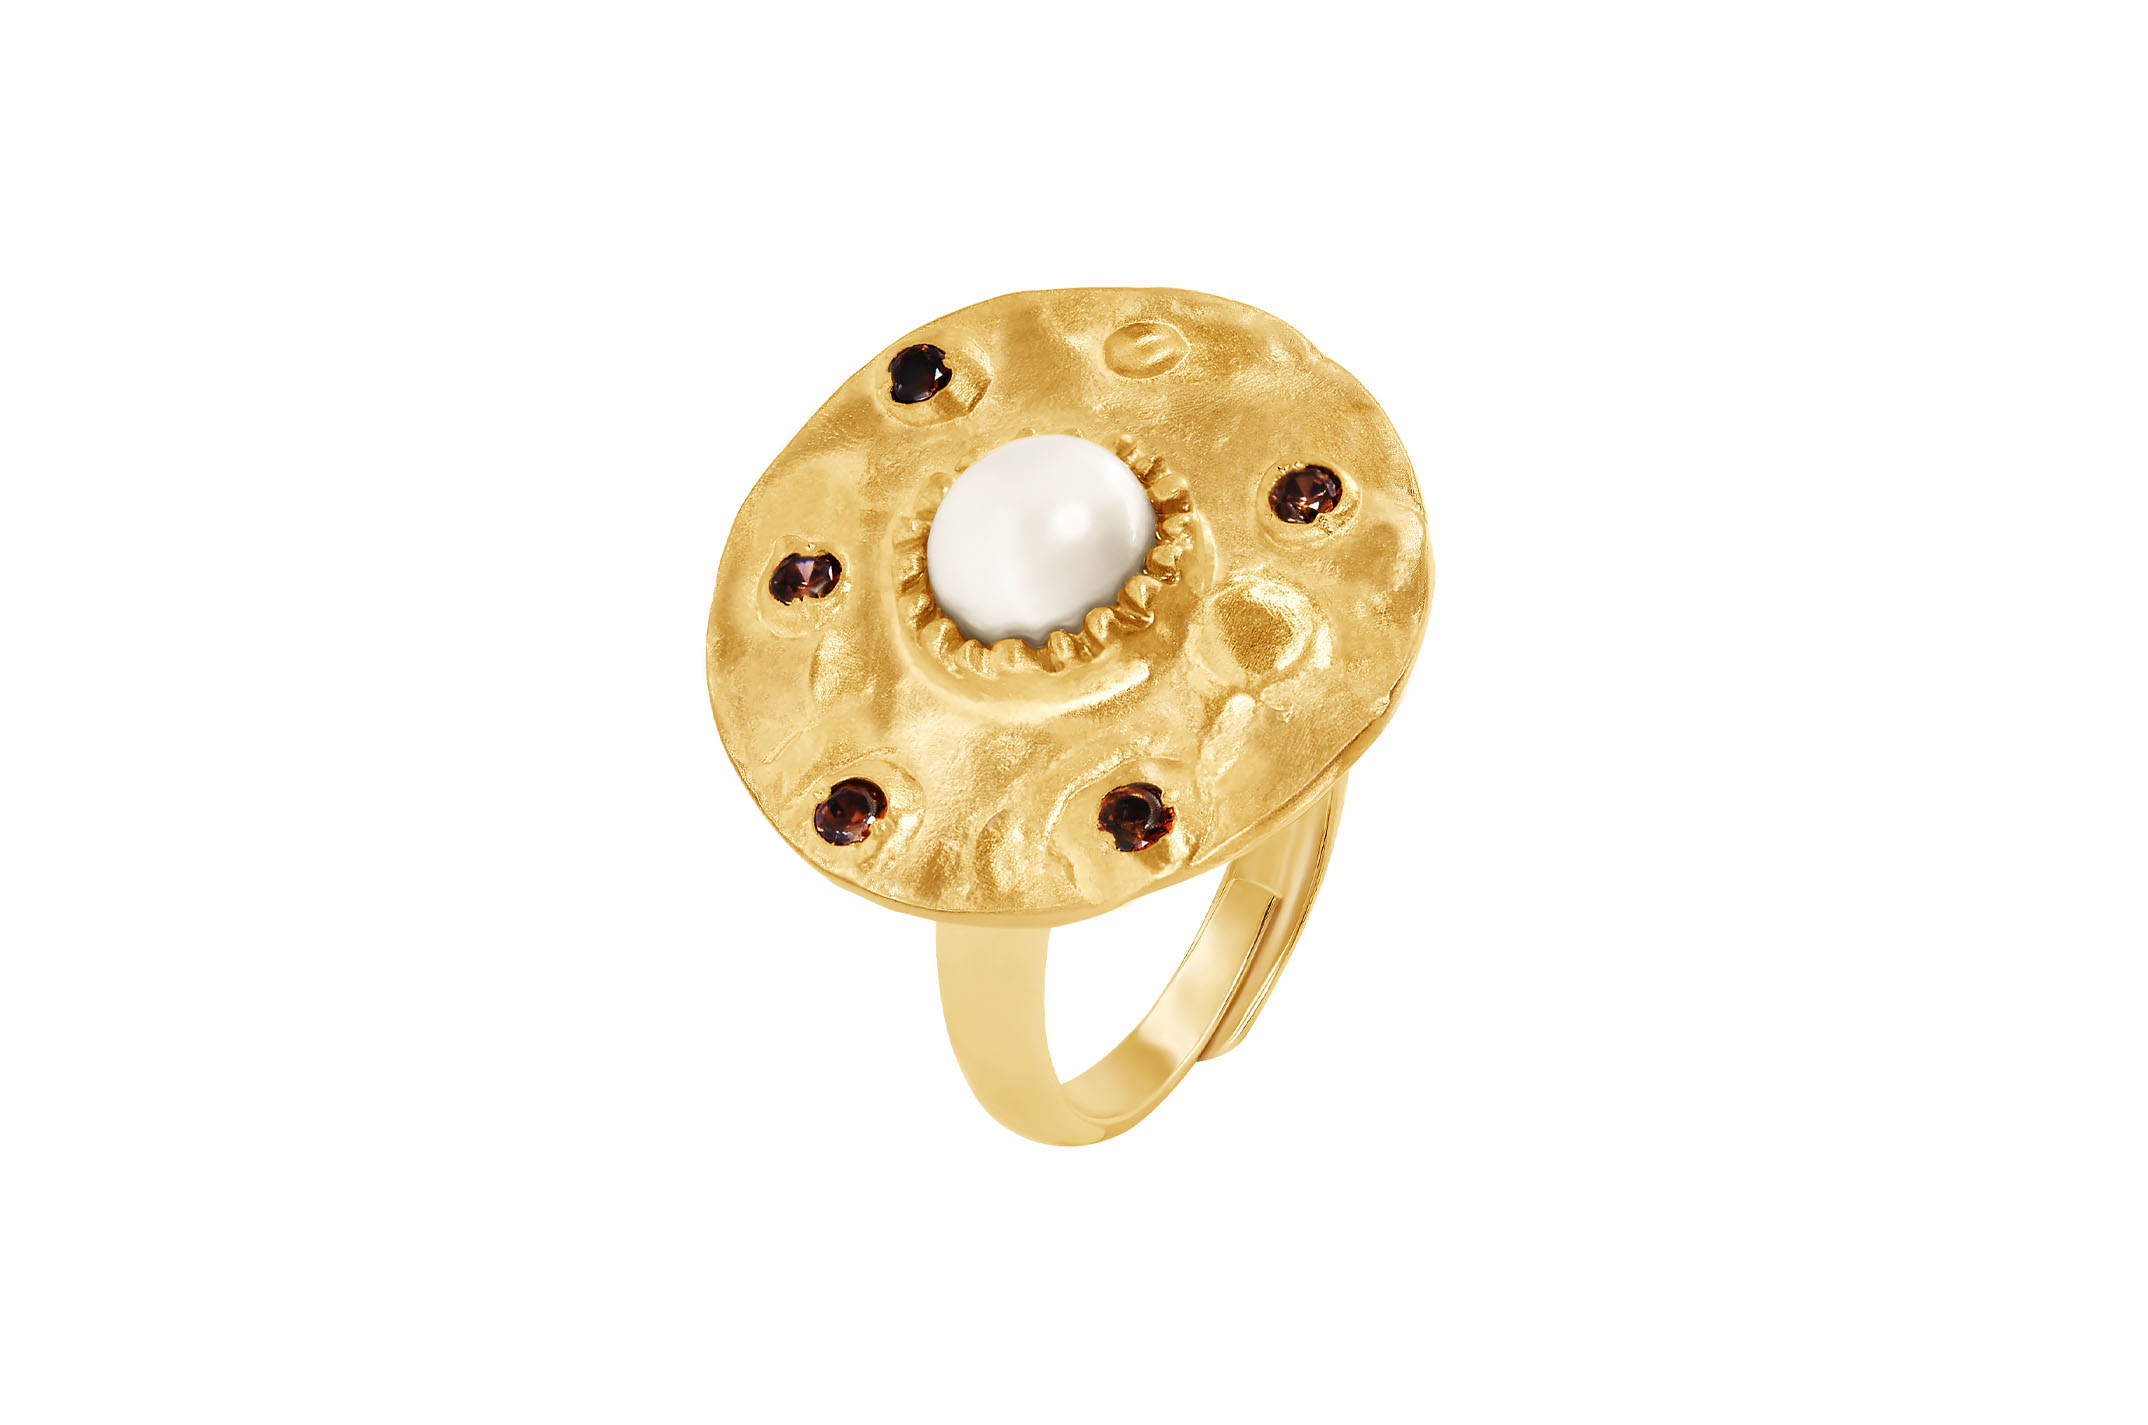 Jewel: ring;Material: 925 silver;Weight: 4.3 gr;Stones: zirconia & pearls;Color: yellow;Size: Adjustable;Gender: woman